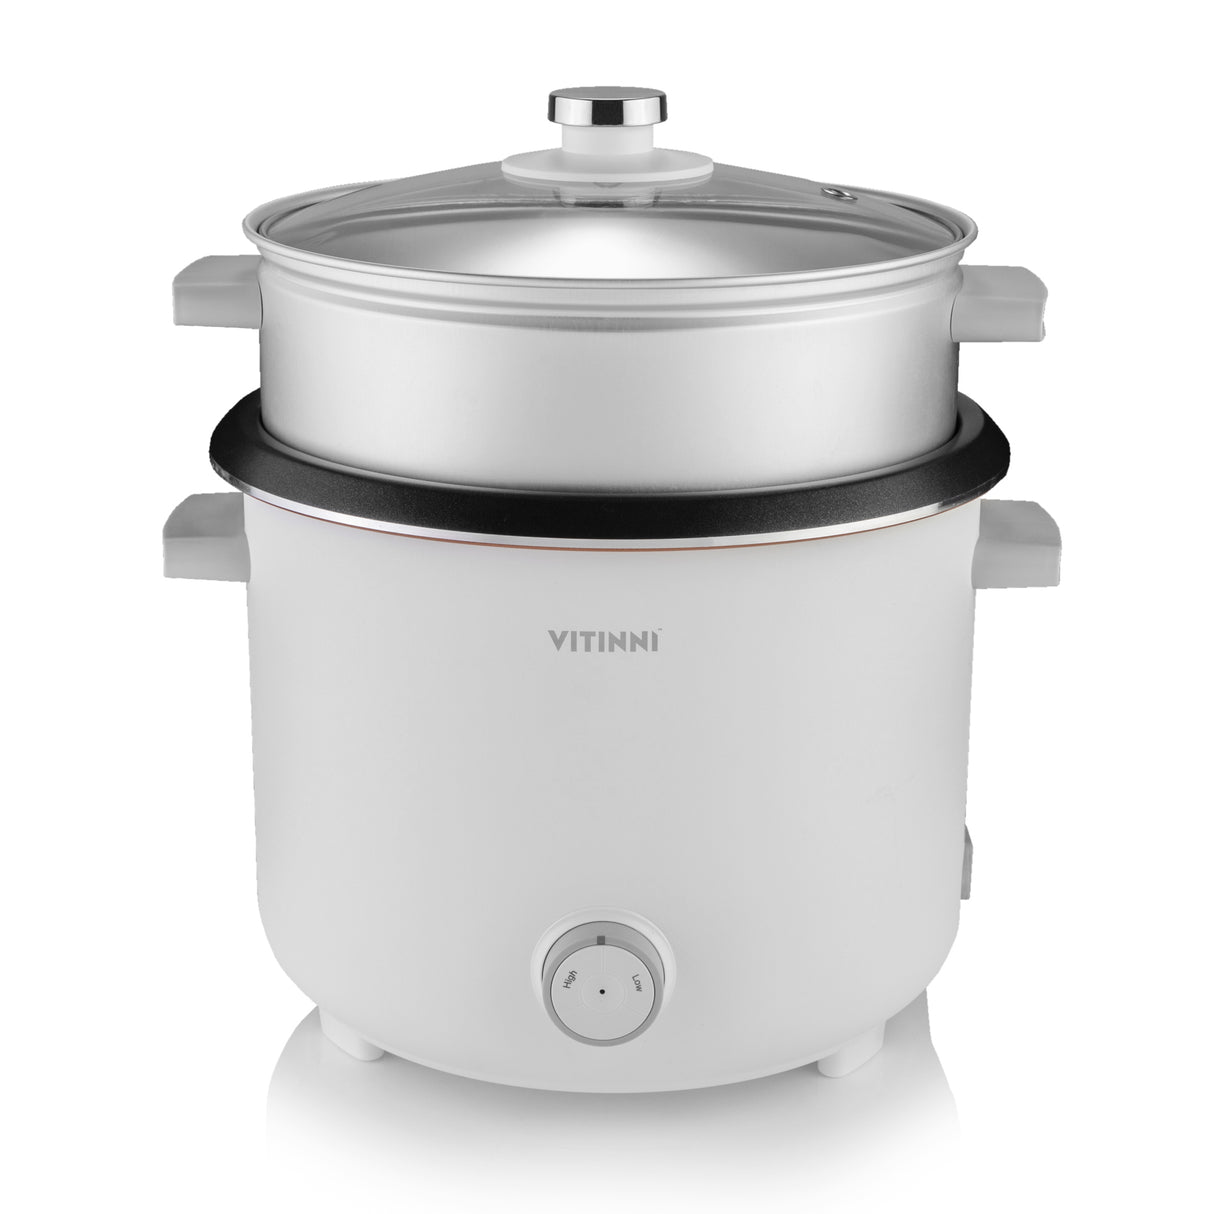 Vitinni Multi Cooker and Food Steamer with Slow Cook Function